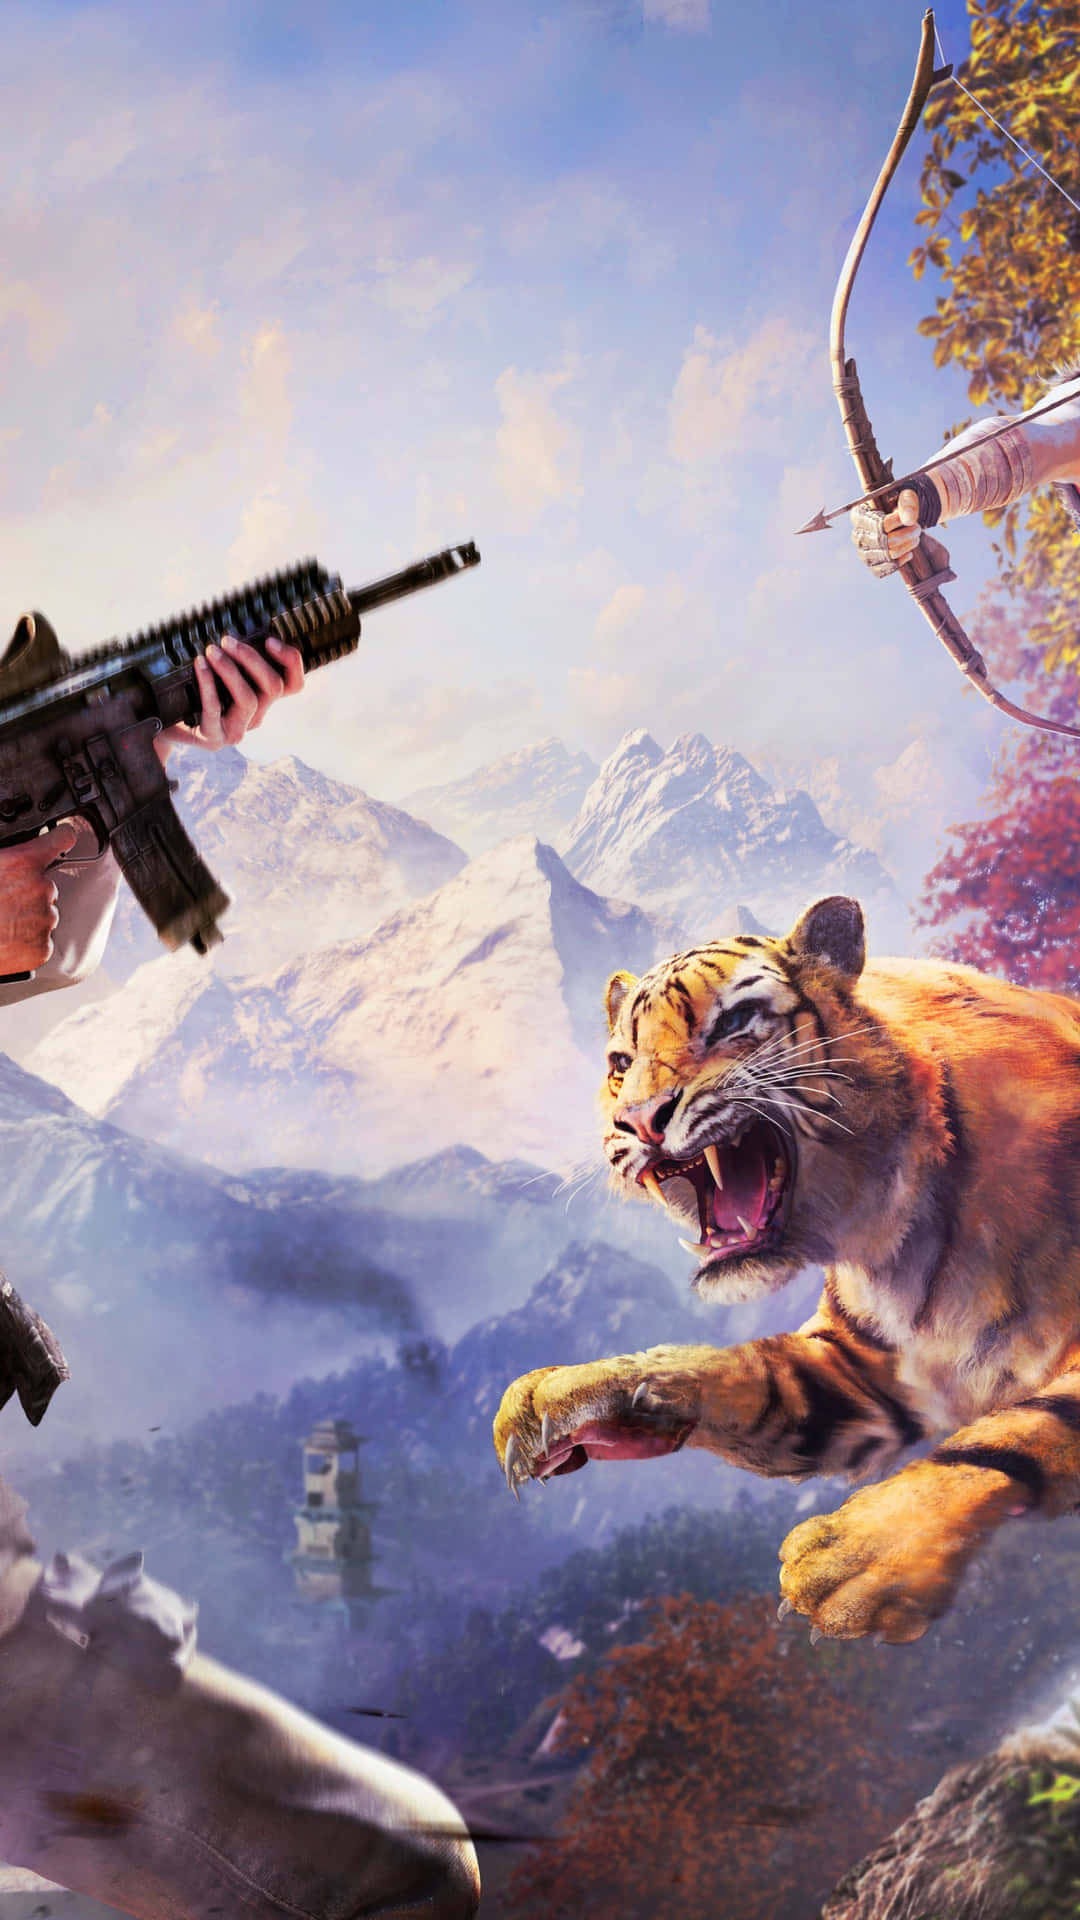 Step into an exciting world of adventure and explore Kyrat with Far Cry 4. Wallpaper